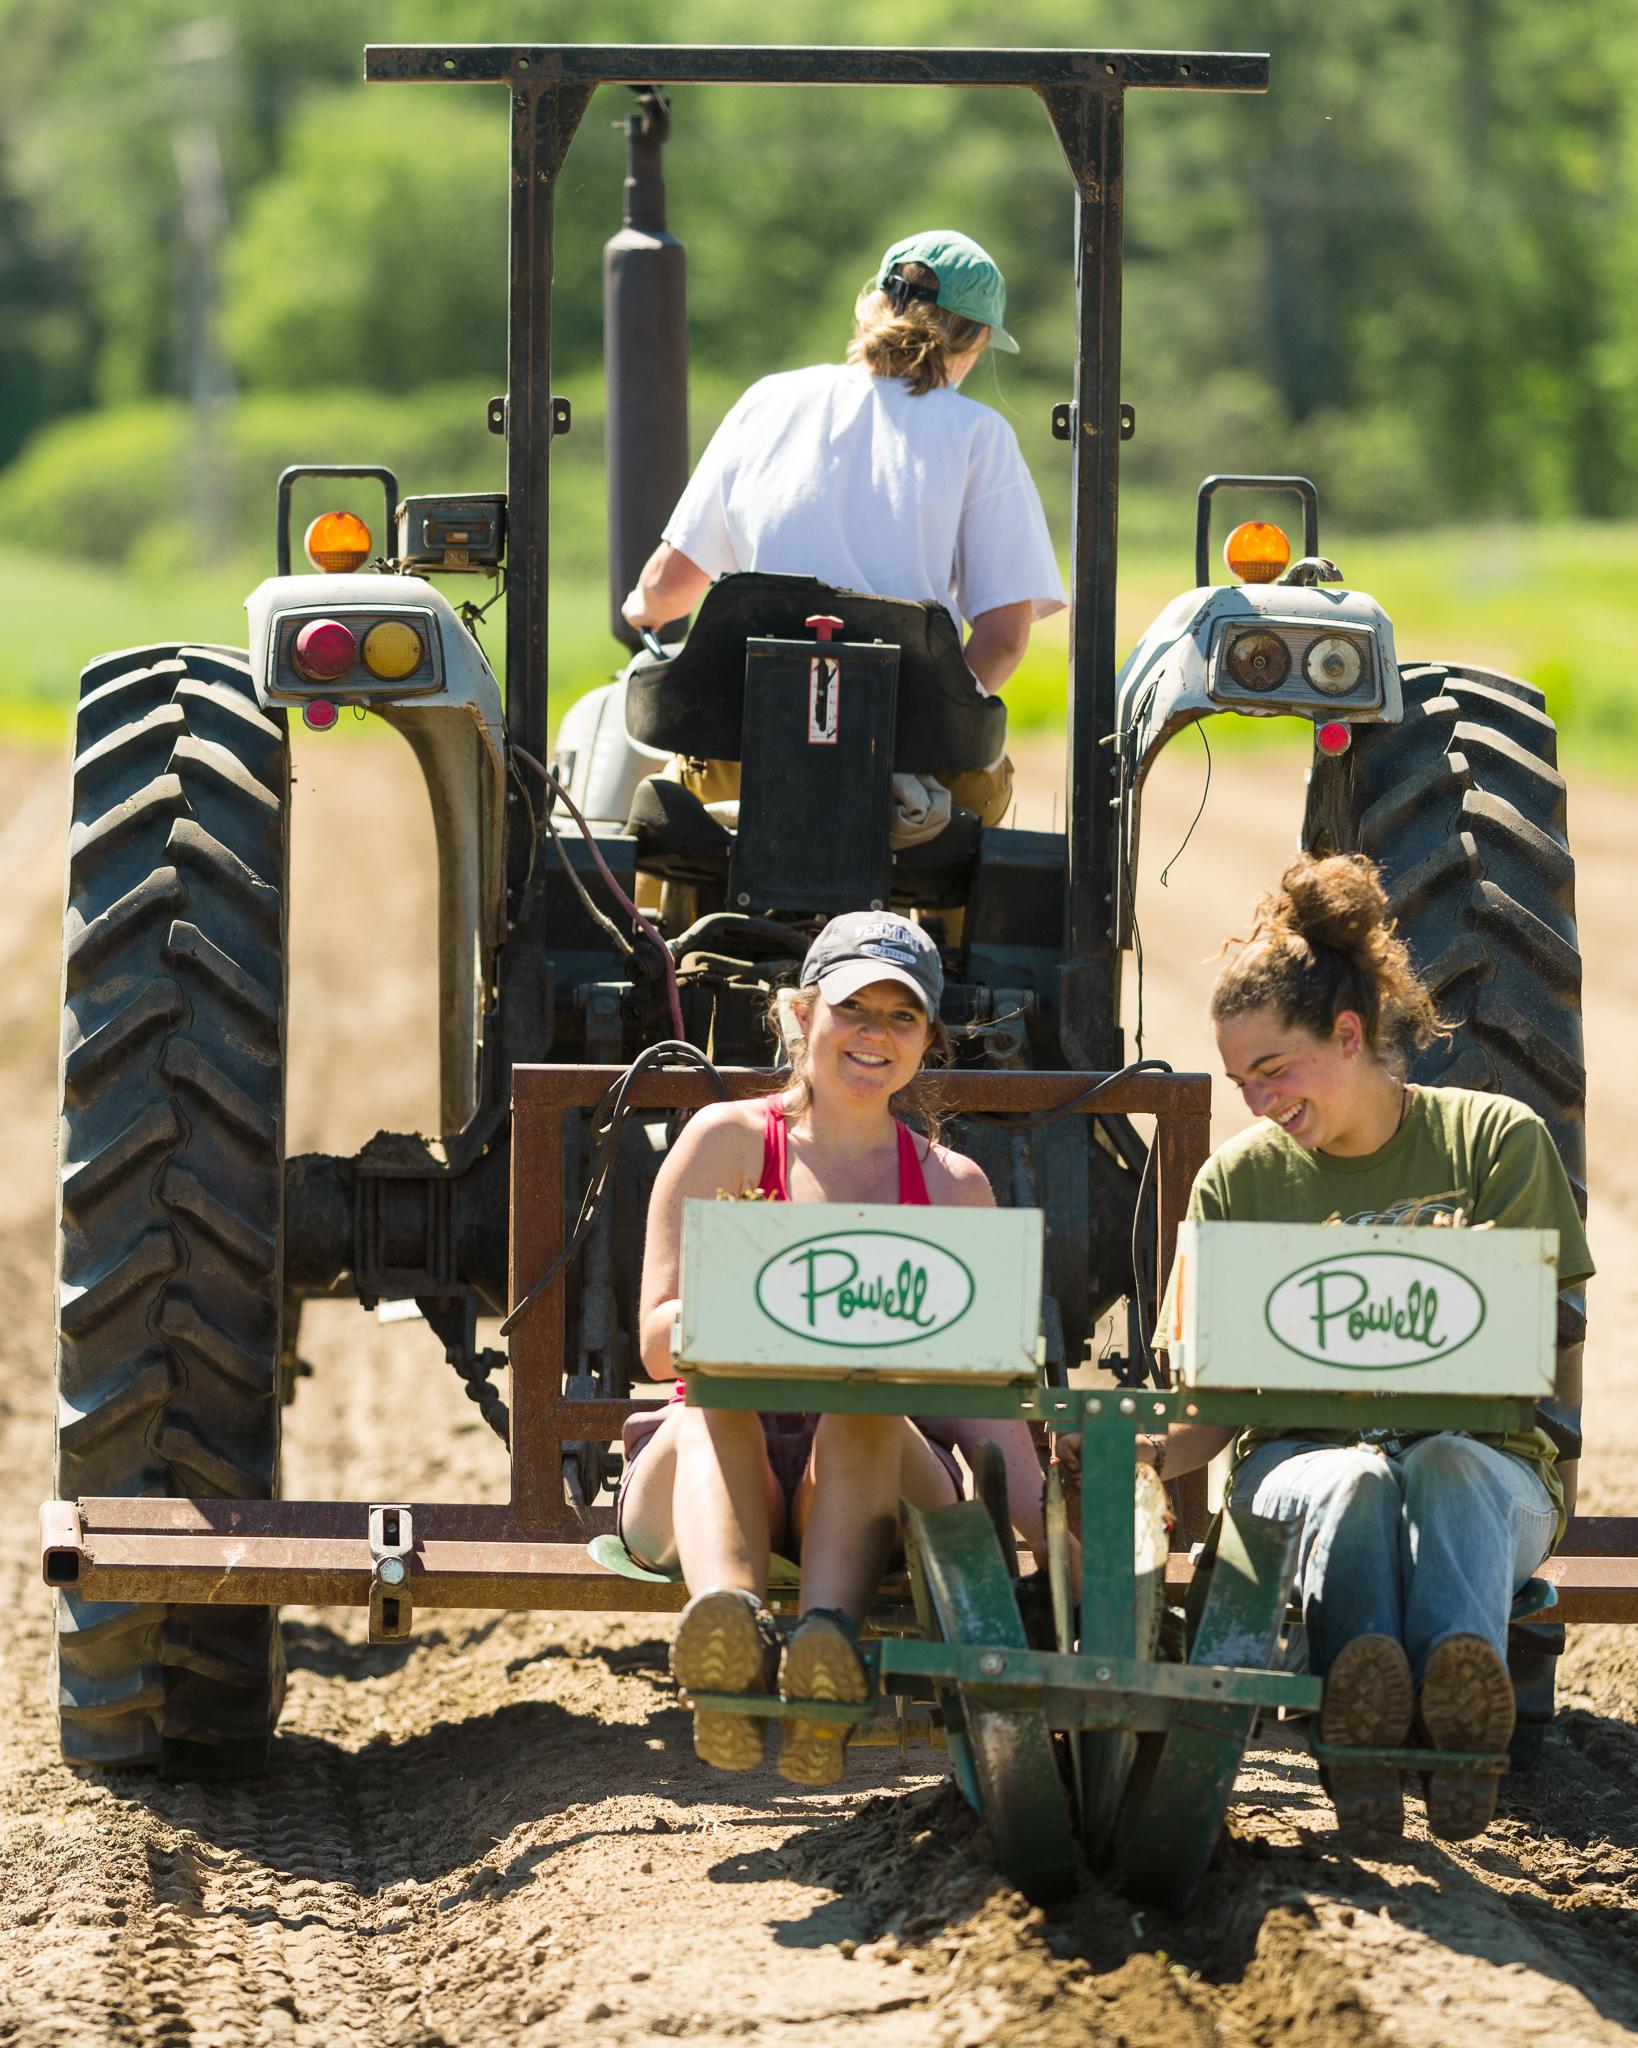 One person drives a tractor while two other people sit behind it and sow seeds.